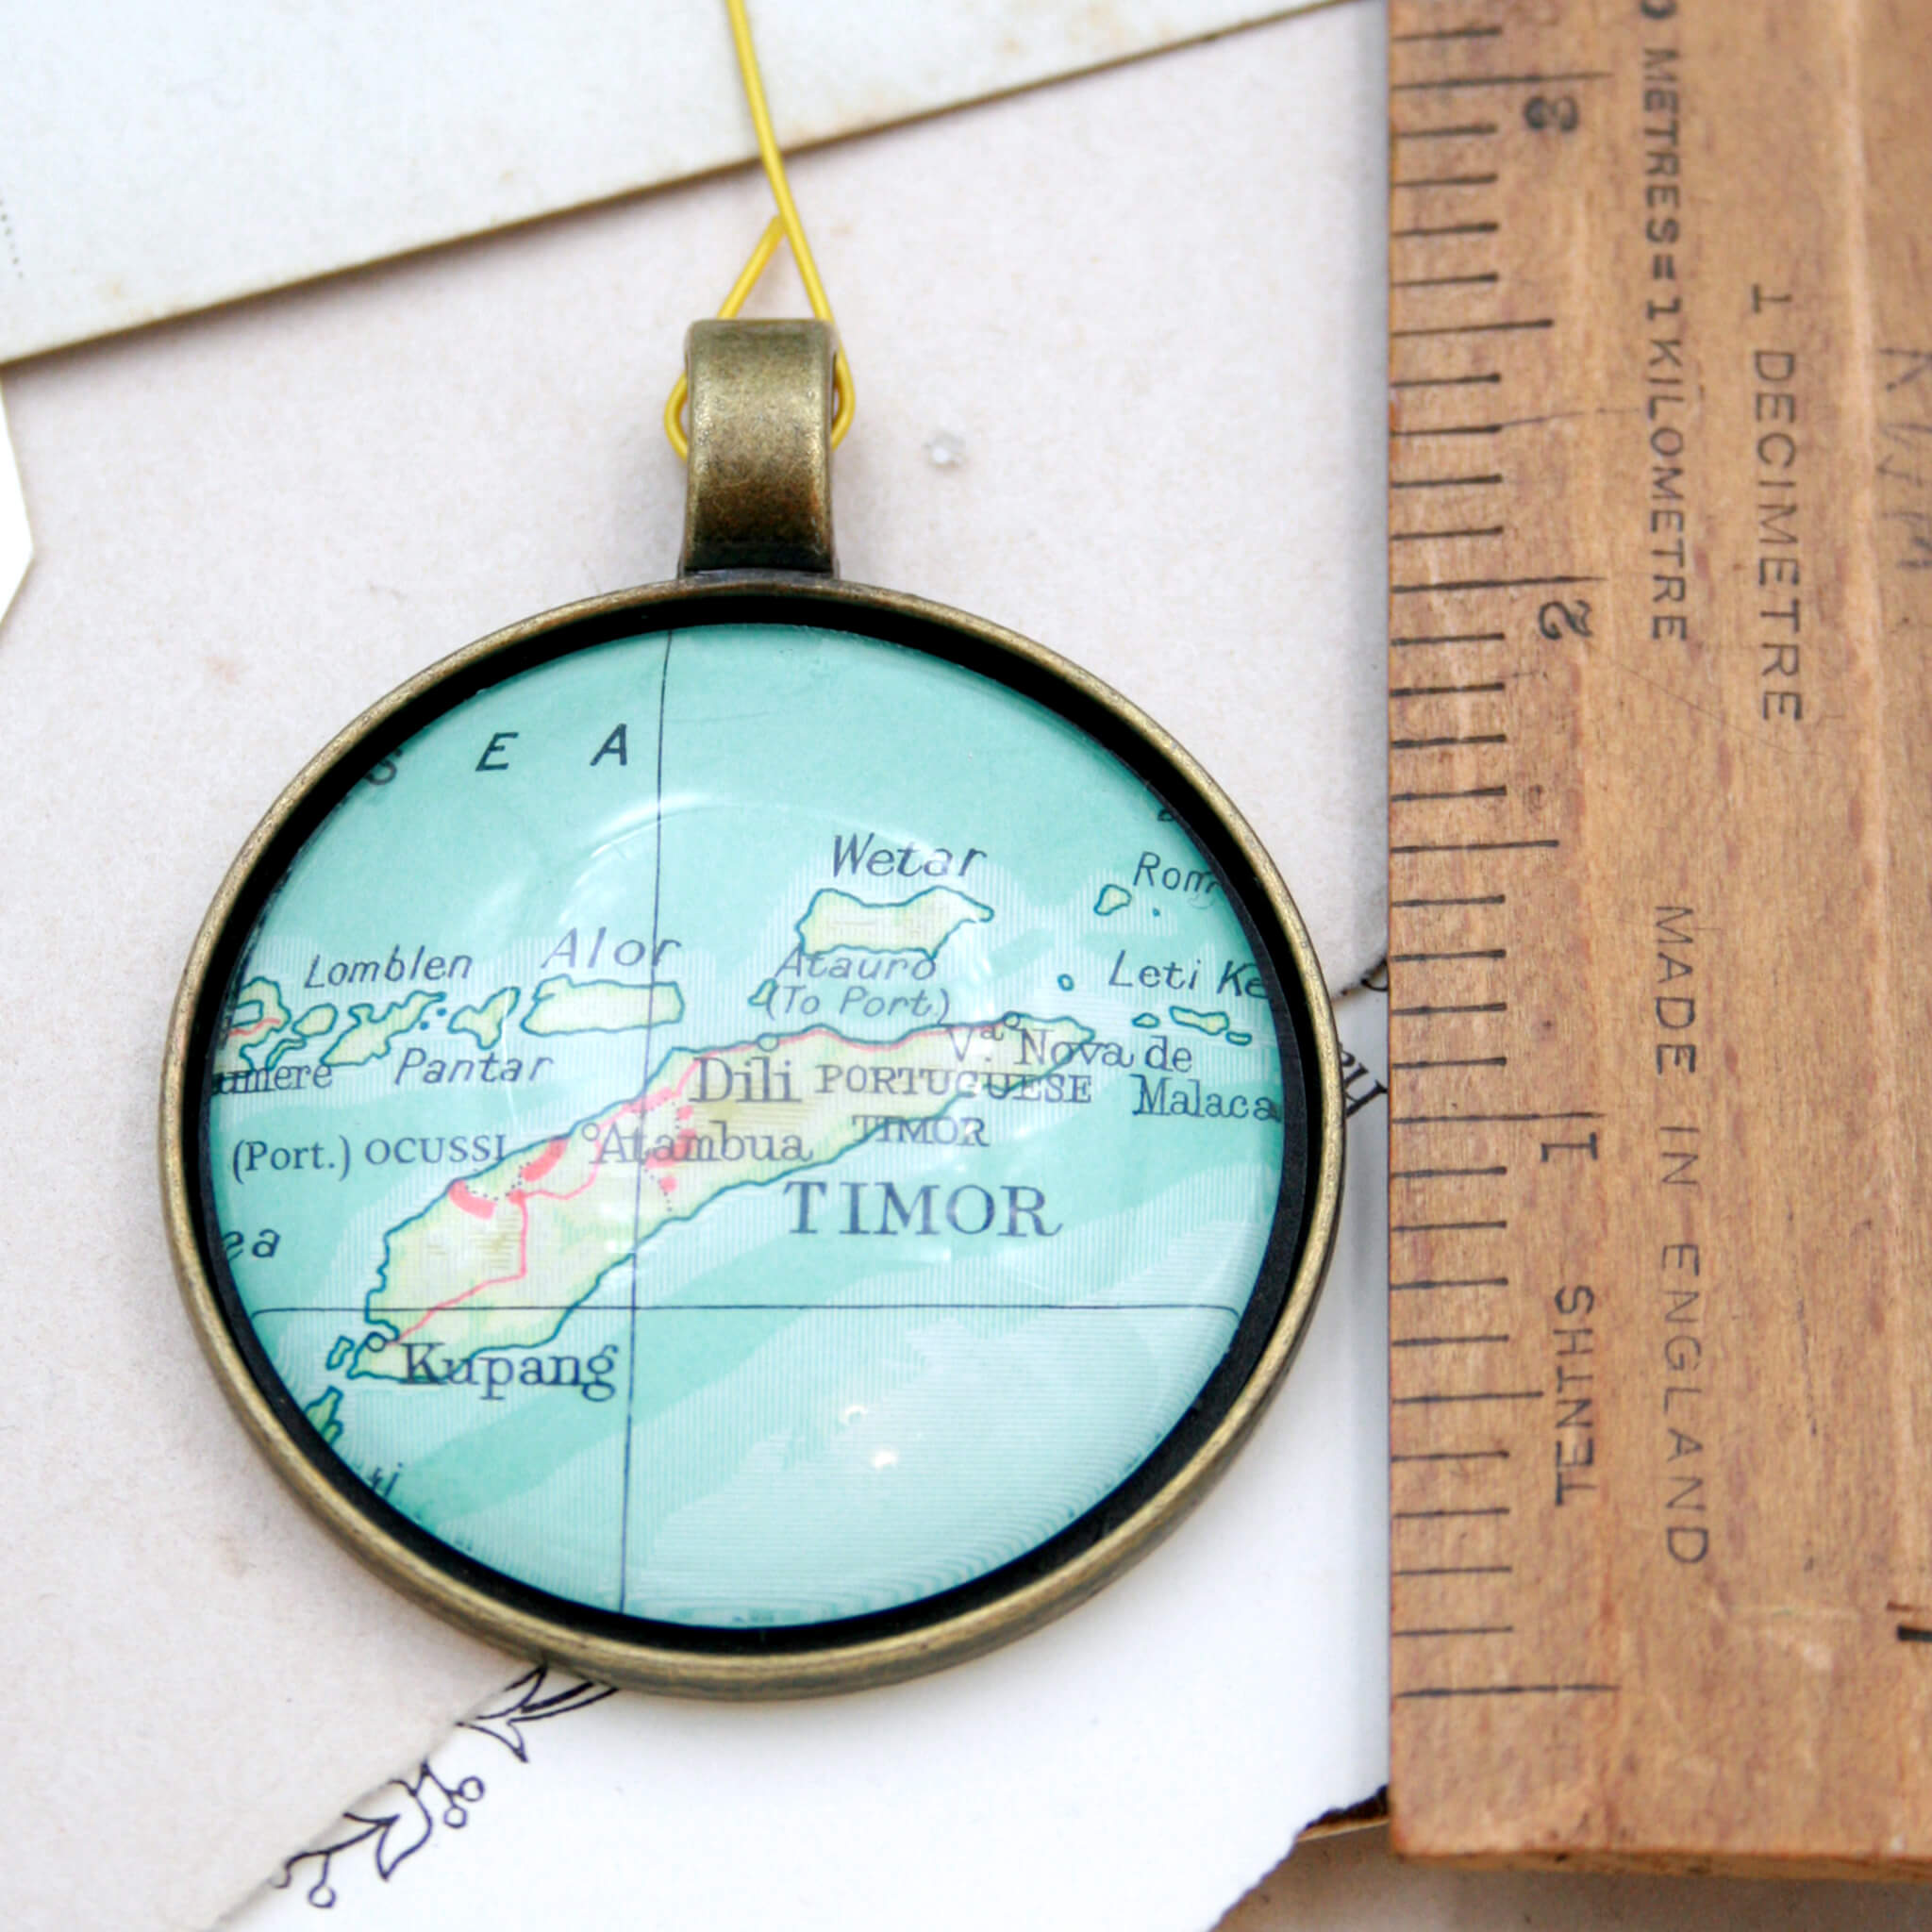 Timor Map Christmas Tree Ornament in bronze tone next to a ruler